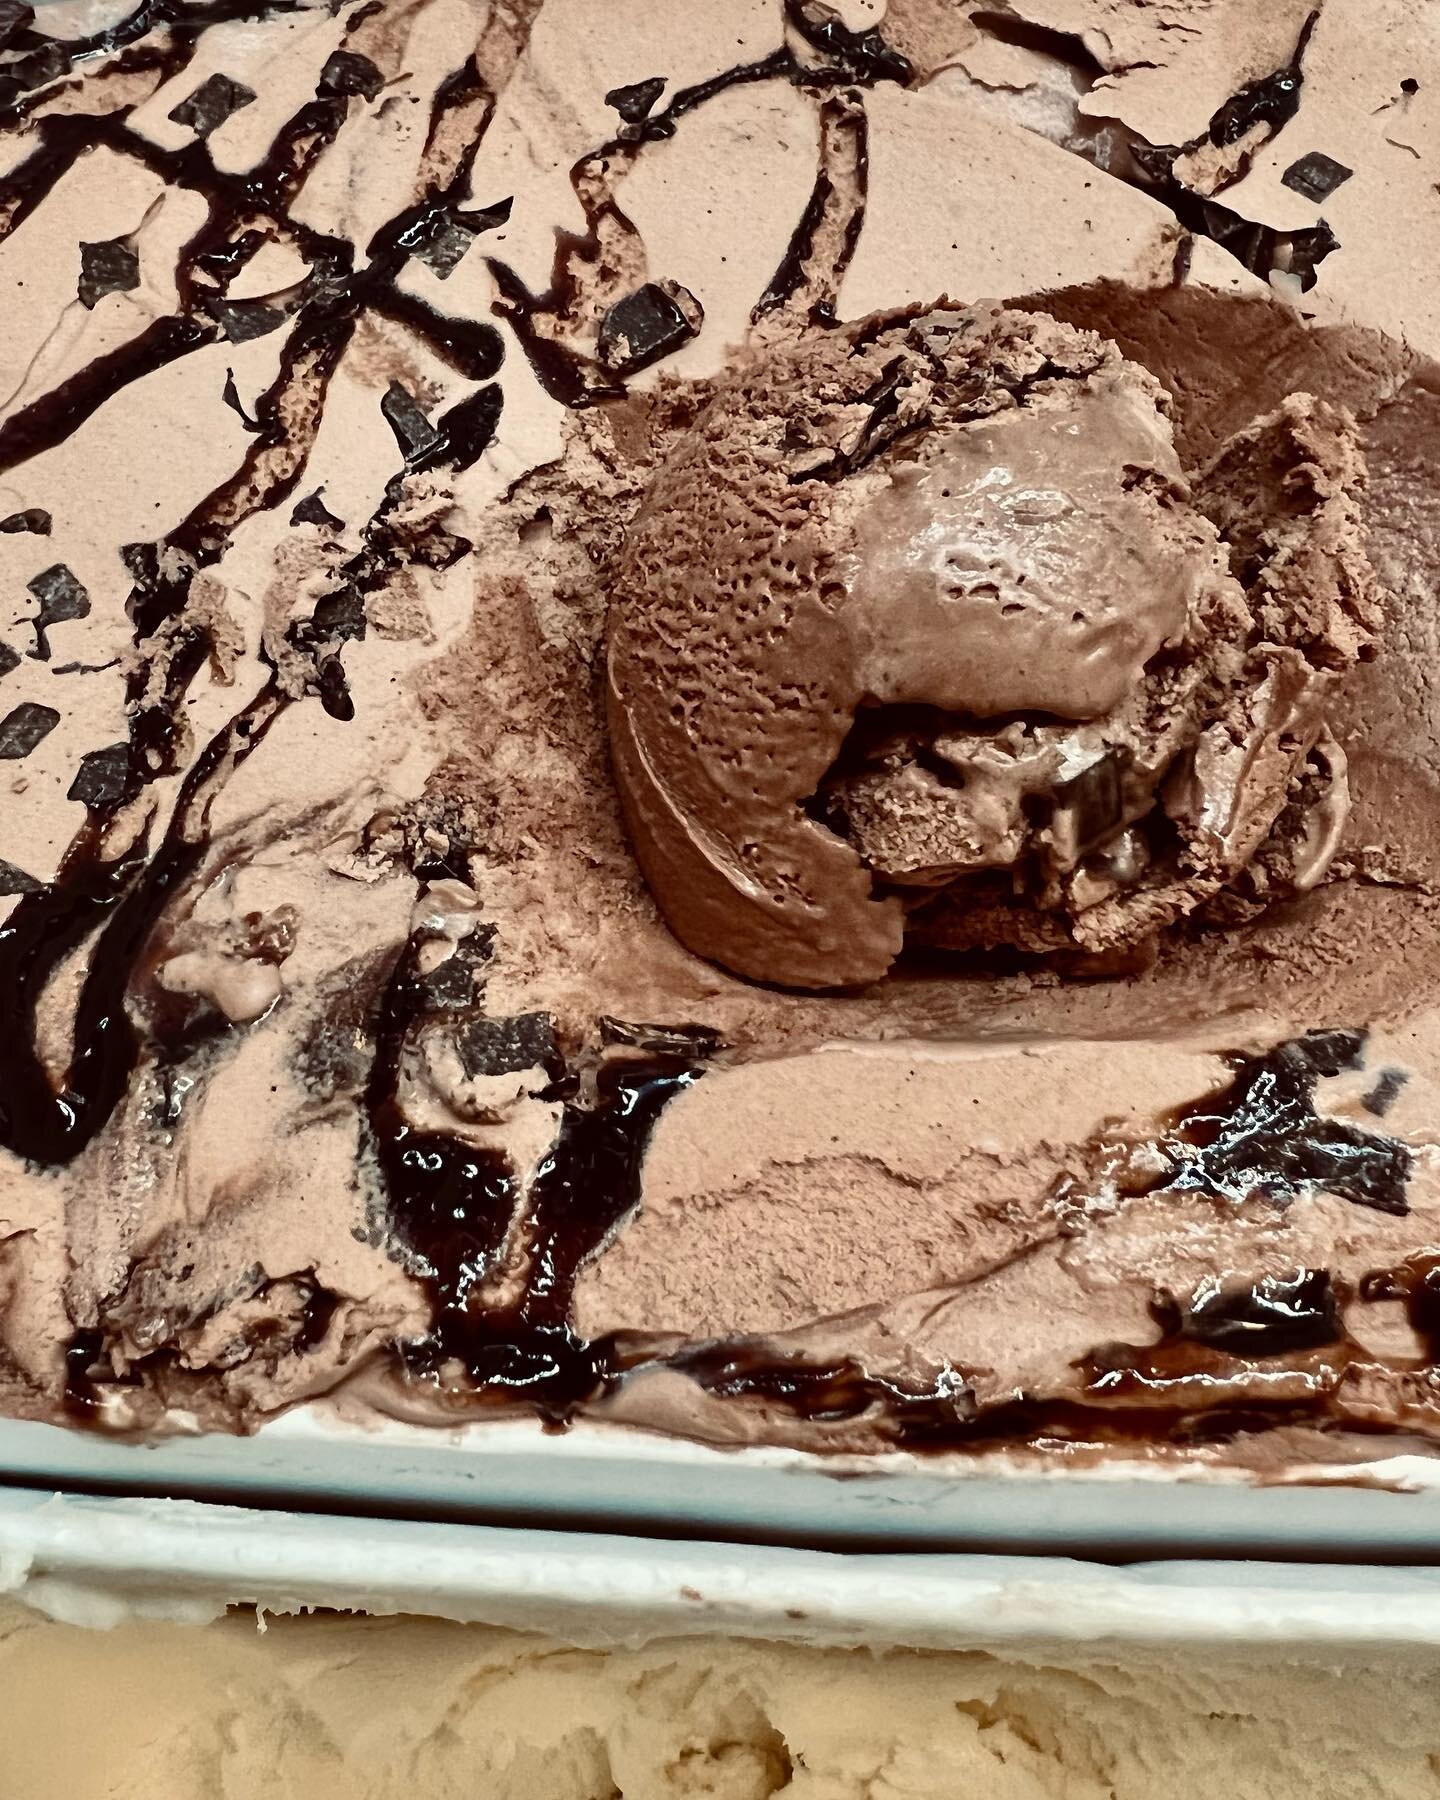 Alright chocolate lovers, this new flavor has your name all over it!